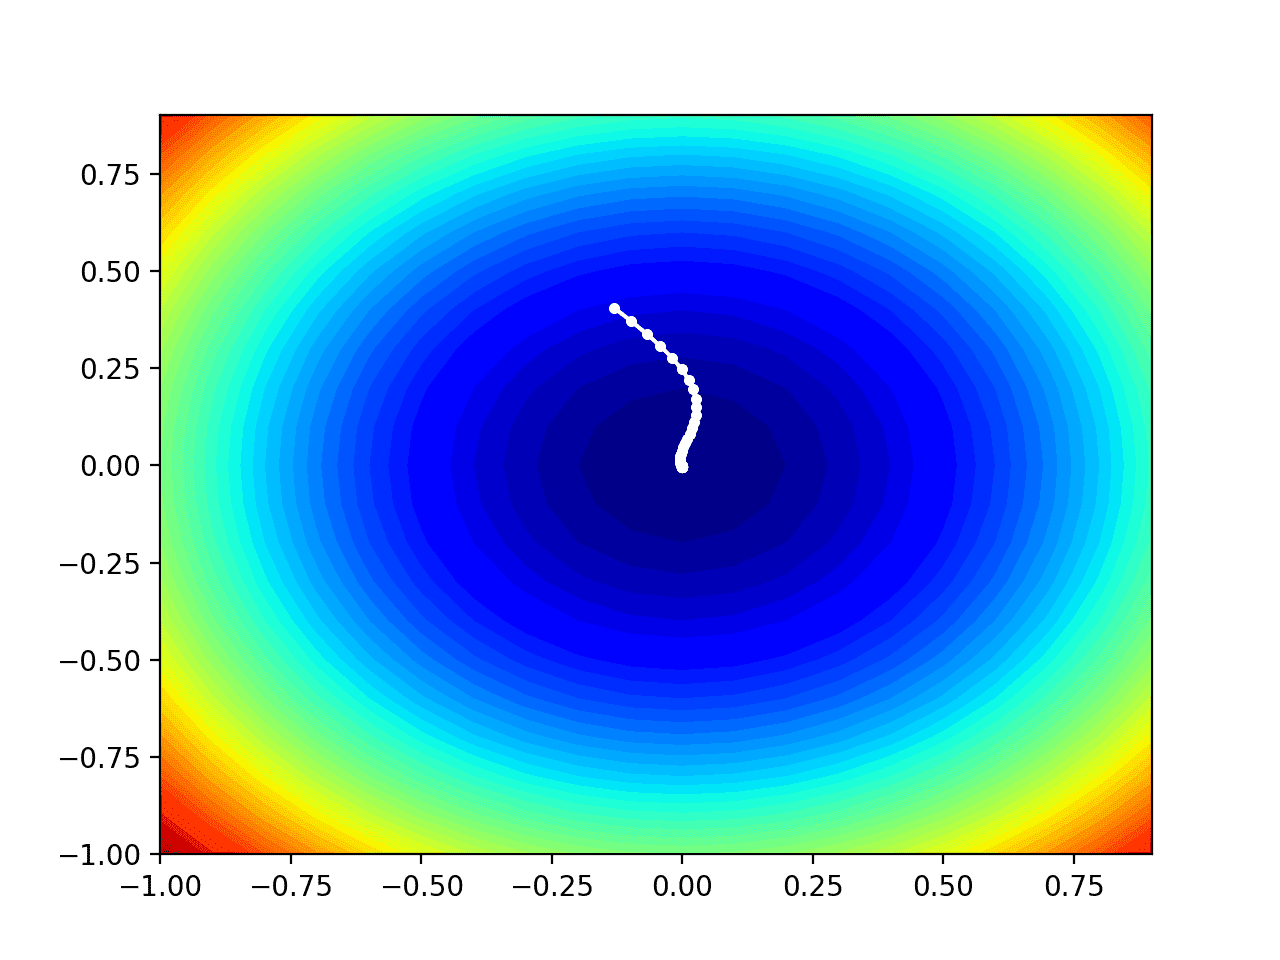 Gradient Descent Optimization With Nadam From Scratch